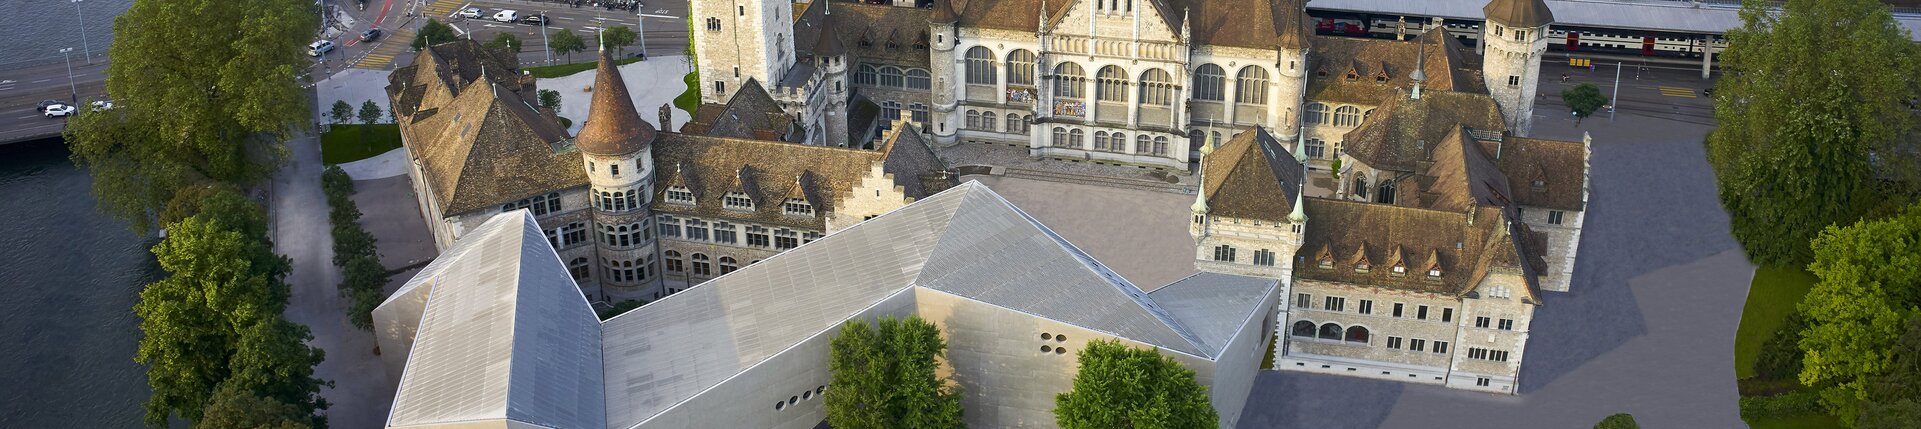 The Landesmuseum from the air